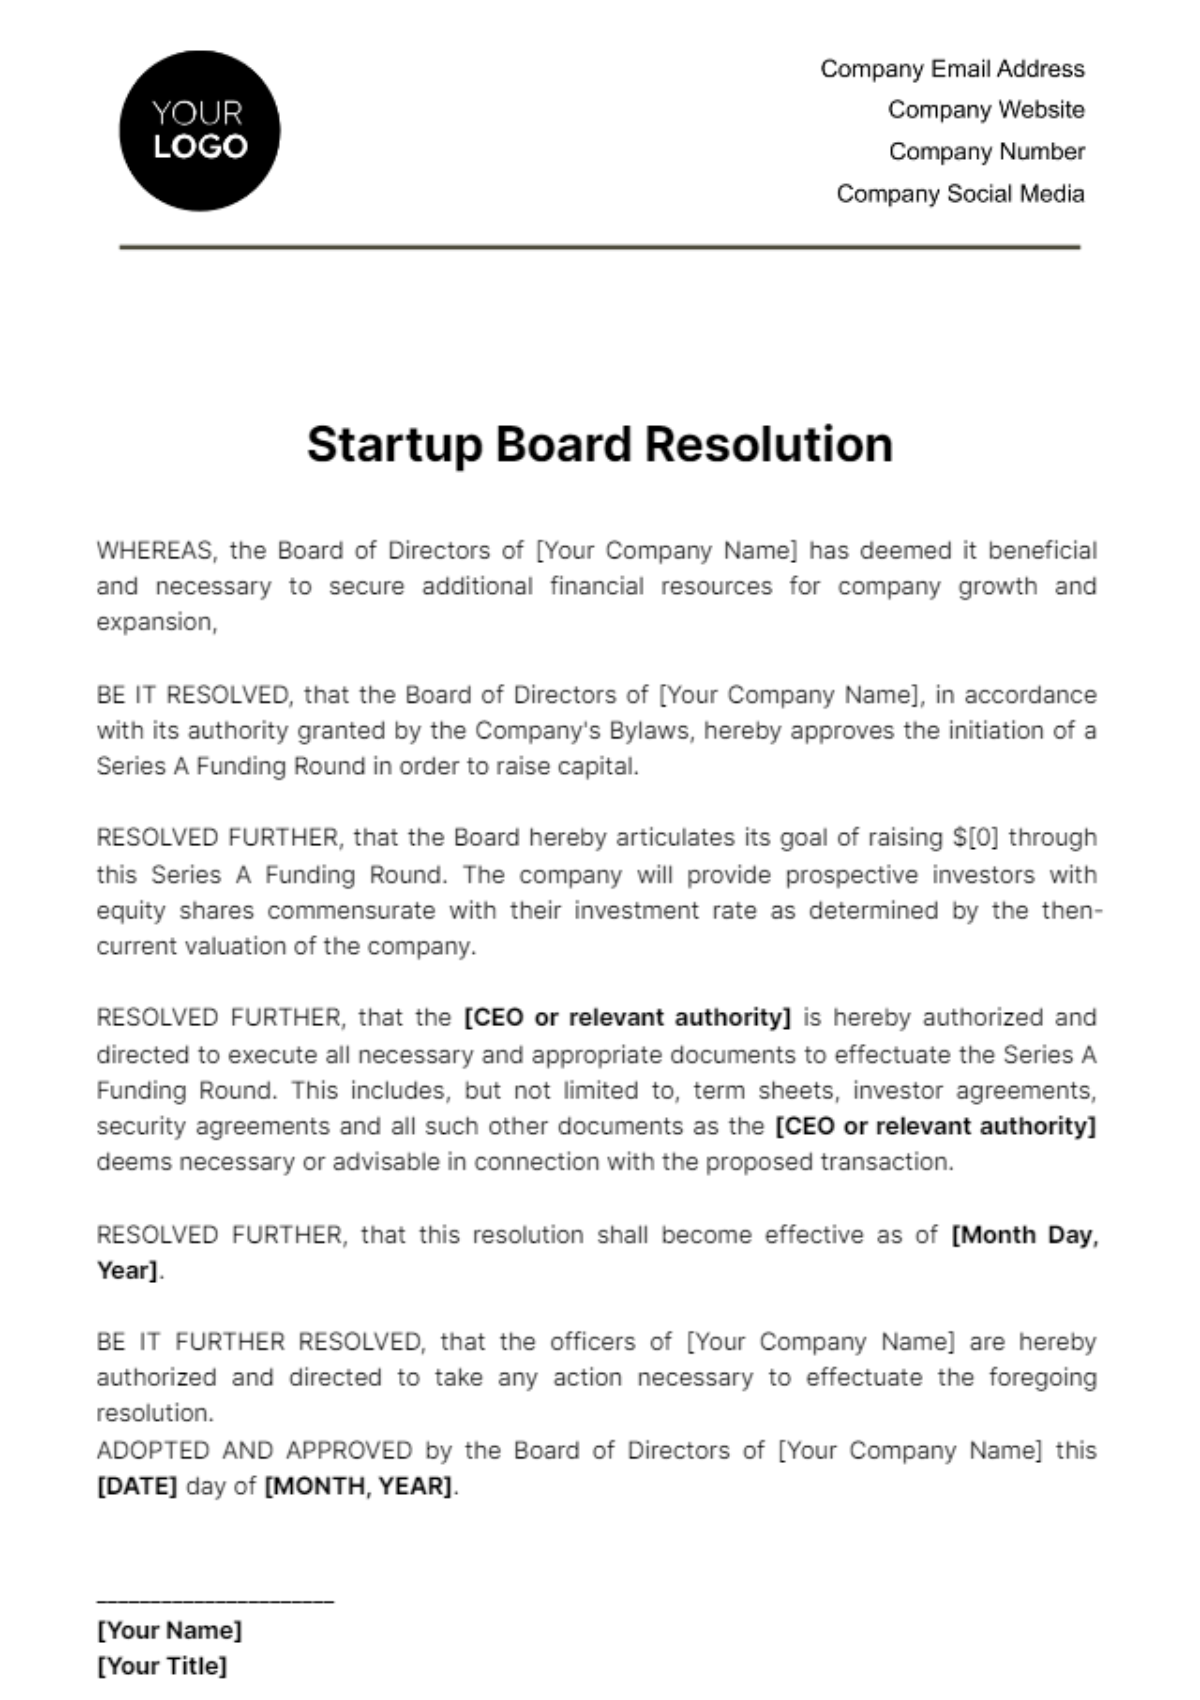 Startup Board Resolution Template